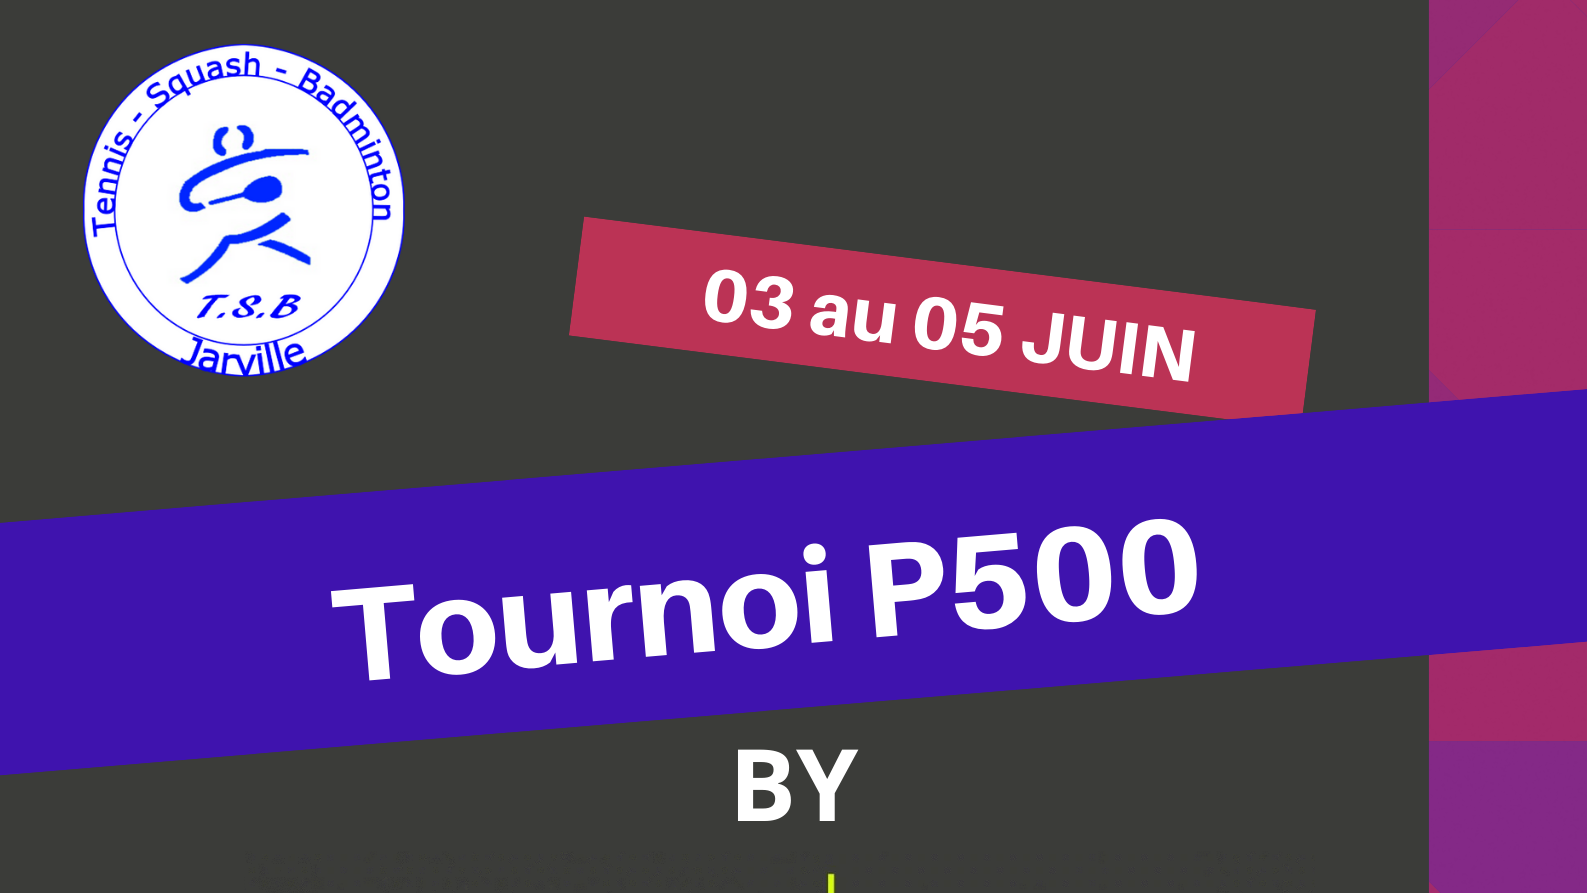 TSB Jarville organizes its first P500